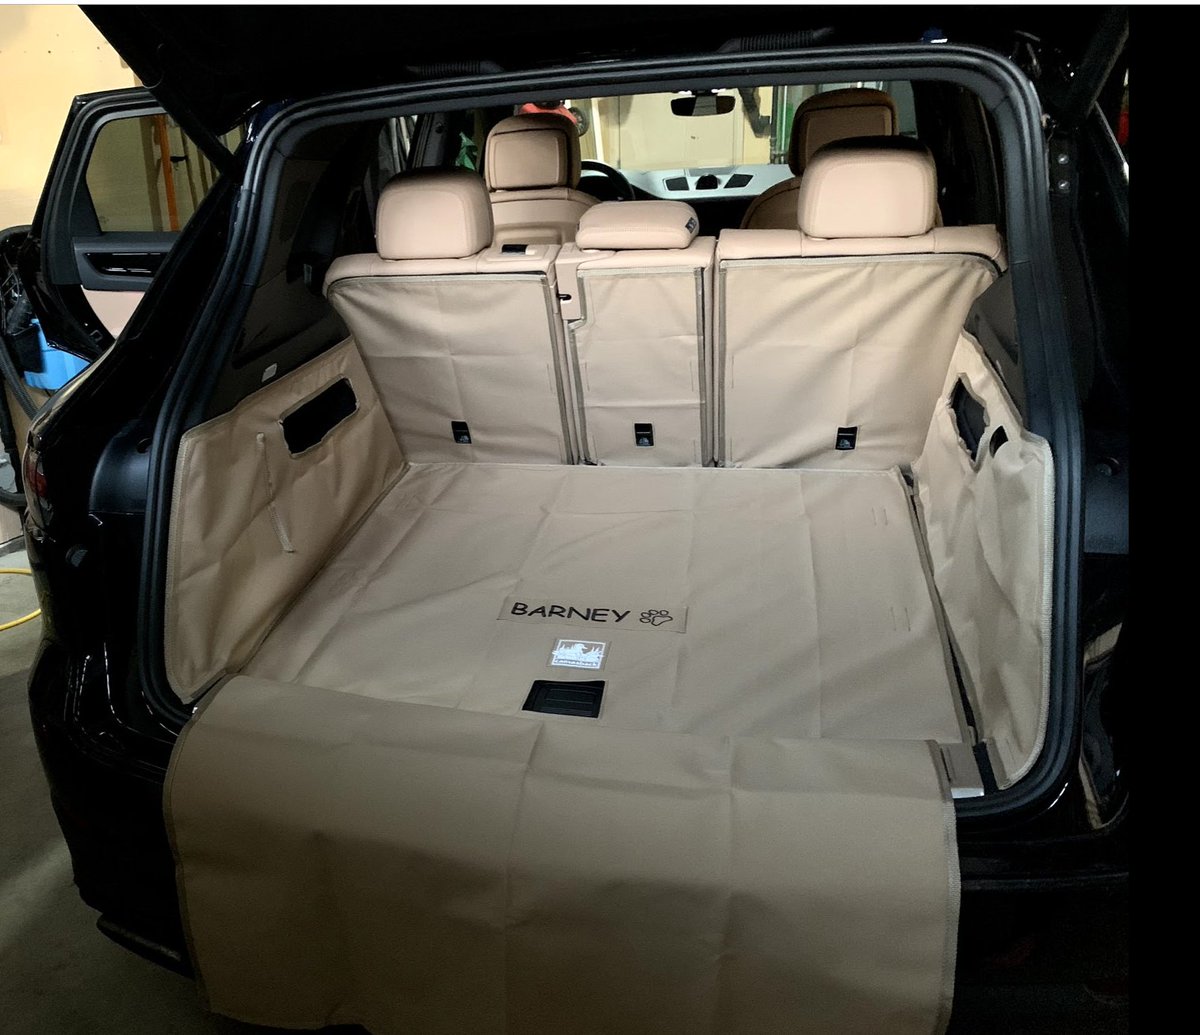 #TanTuesday!

Check out this luxurious cargo area for a Porsche Cayenne! Our mocha fabric is perfect for cream/tan interiors and makes this Cayenne look like it came from the factory!😍

#mycanvasback #porschecayenne #cayenne #taninteriors #vehicleprotection #porscheaccessories